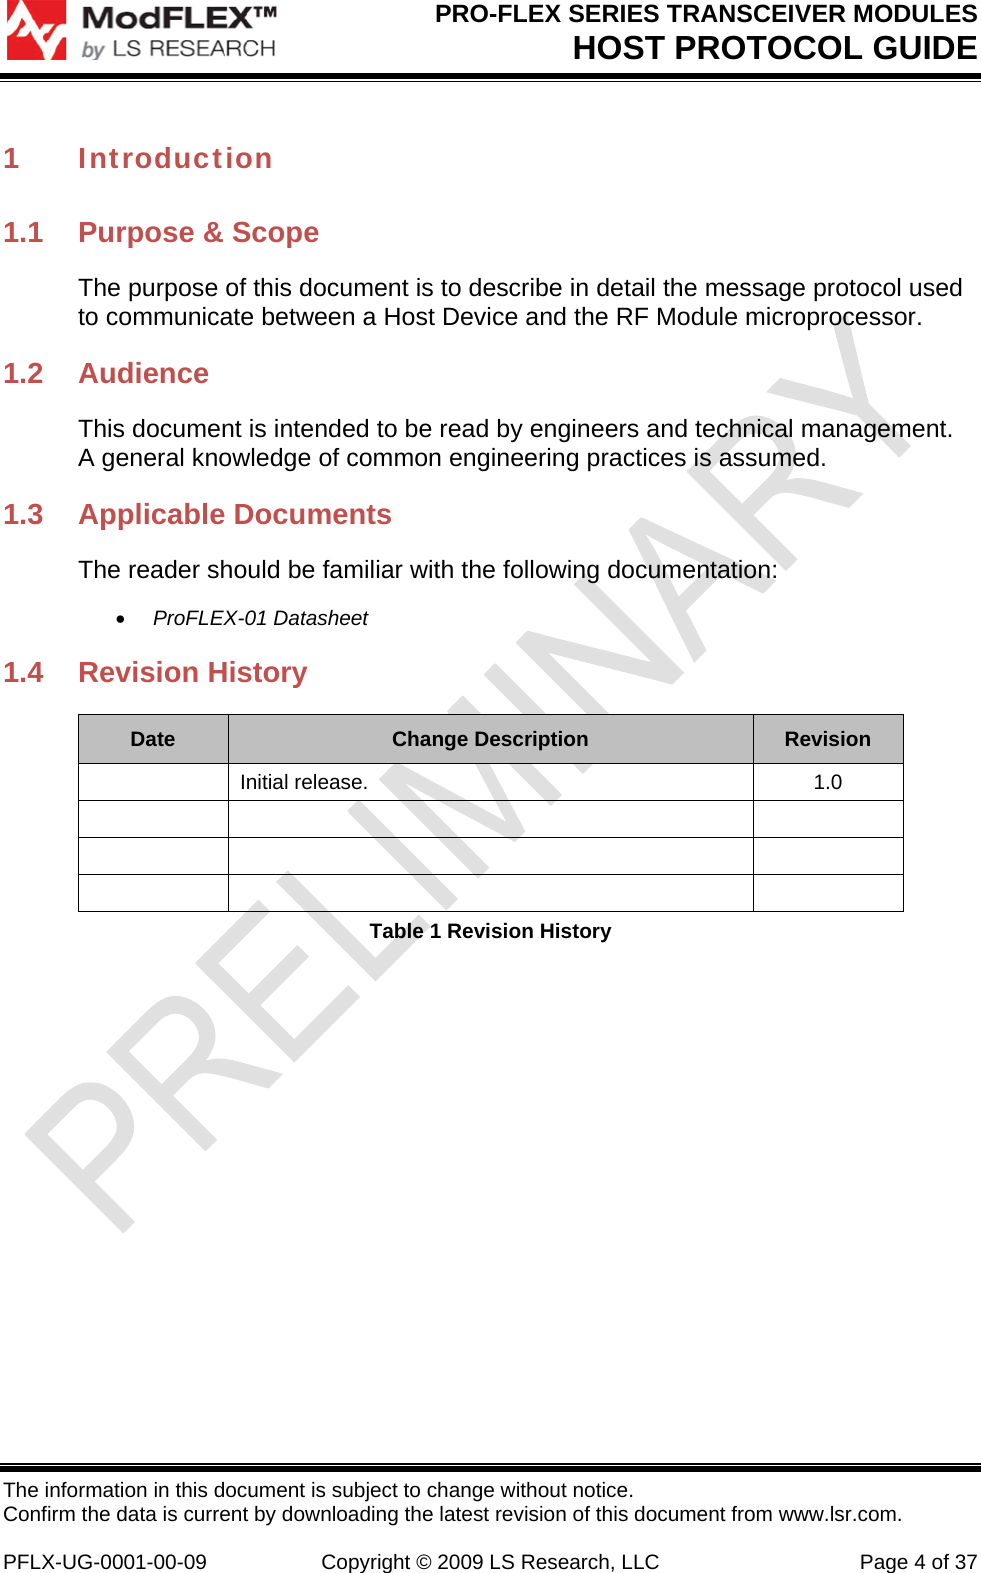 PRO-FLEX SERIES TRANSCEIVER MODULES HOST PROTOCOL GUIDE The information in this document is subject to change without notice. Confirm the data is current by downloading the latest revision of this document from www.lsr.com.  PFLX-UG-0001-00-09  Copyright © 2009 LS Research, LLC  Page 4 of 37 1 Introduction 1.1  Purpose &amp; Scope The purpose of this document is to describe in detail the message protocol used to communicate between a Host Device and the RF Module microprocessor. 1.2 Audience This document is intended to be read by engineers and technical management.  A general knowledge of common engineering practices is assumed. 1.3 Applicable Documents The reader should be familiar with the following documentation:  ProFLEX-01 Datasheet 1.4 Revision History Date  Change Description  Revision  Initial release.  1.0             Table 1 Revision History 